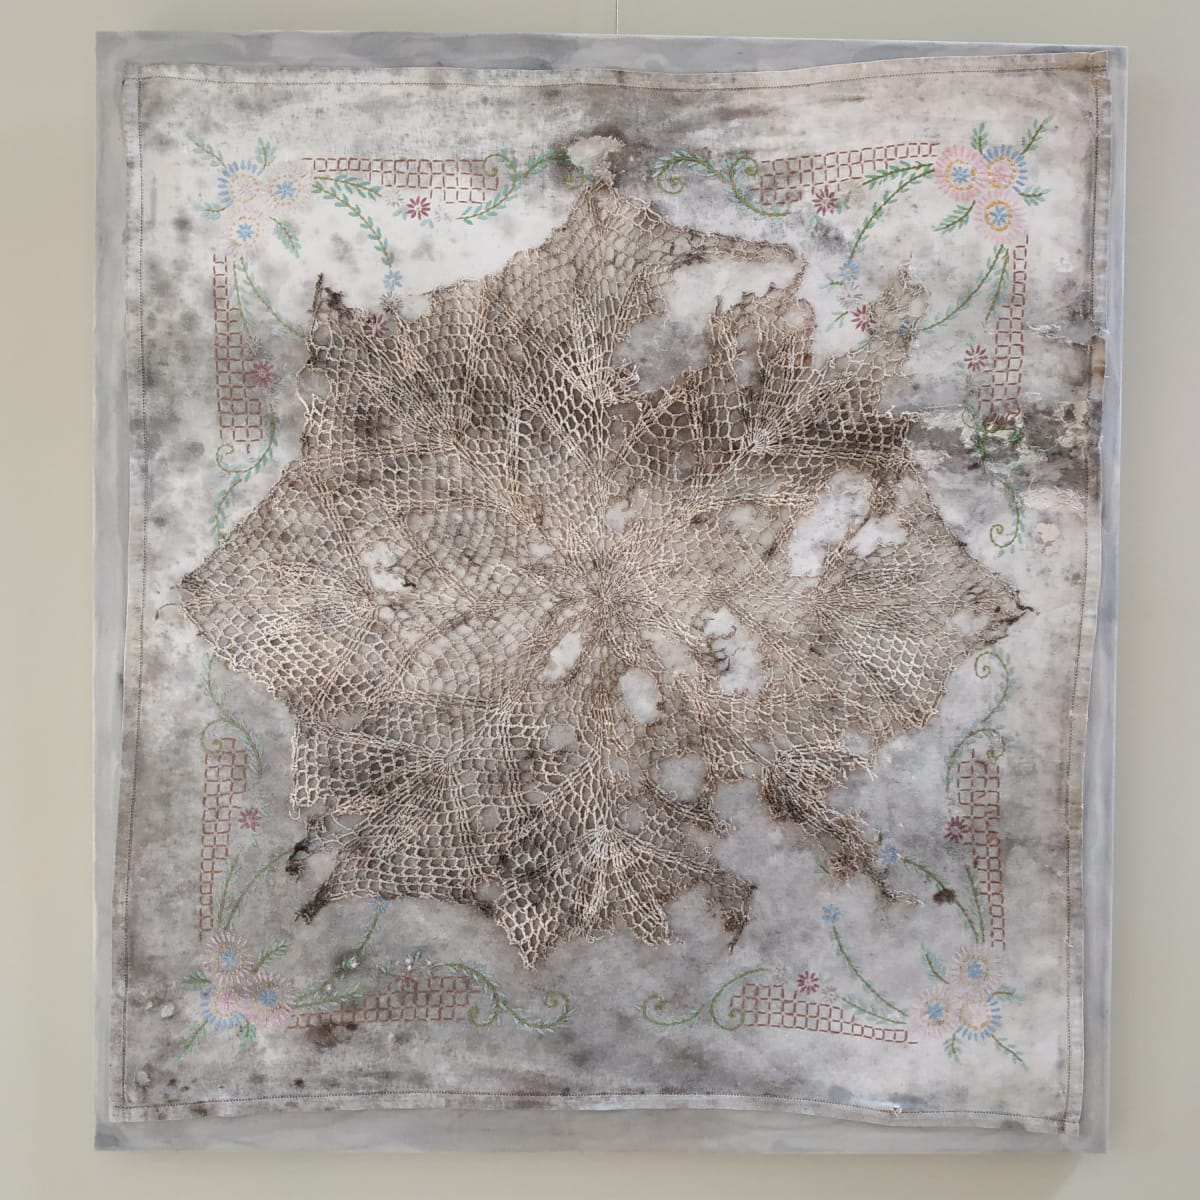 Stain, Launder, Repeat by Lesley Turner  Image: Lesley Turner, 'Stain, Launder, Repeat', 2019, 37"x34"x0.5", Tree stained afternoon tea cloth, composted doily, polyester, and cotton thread. The epitome of the relentless laundry cycle, these handmade cloths are repeatedly stained and laundered until worn out.